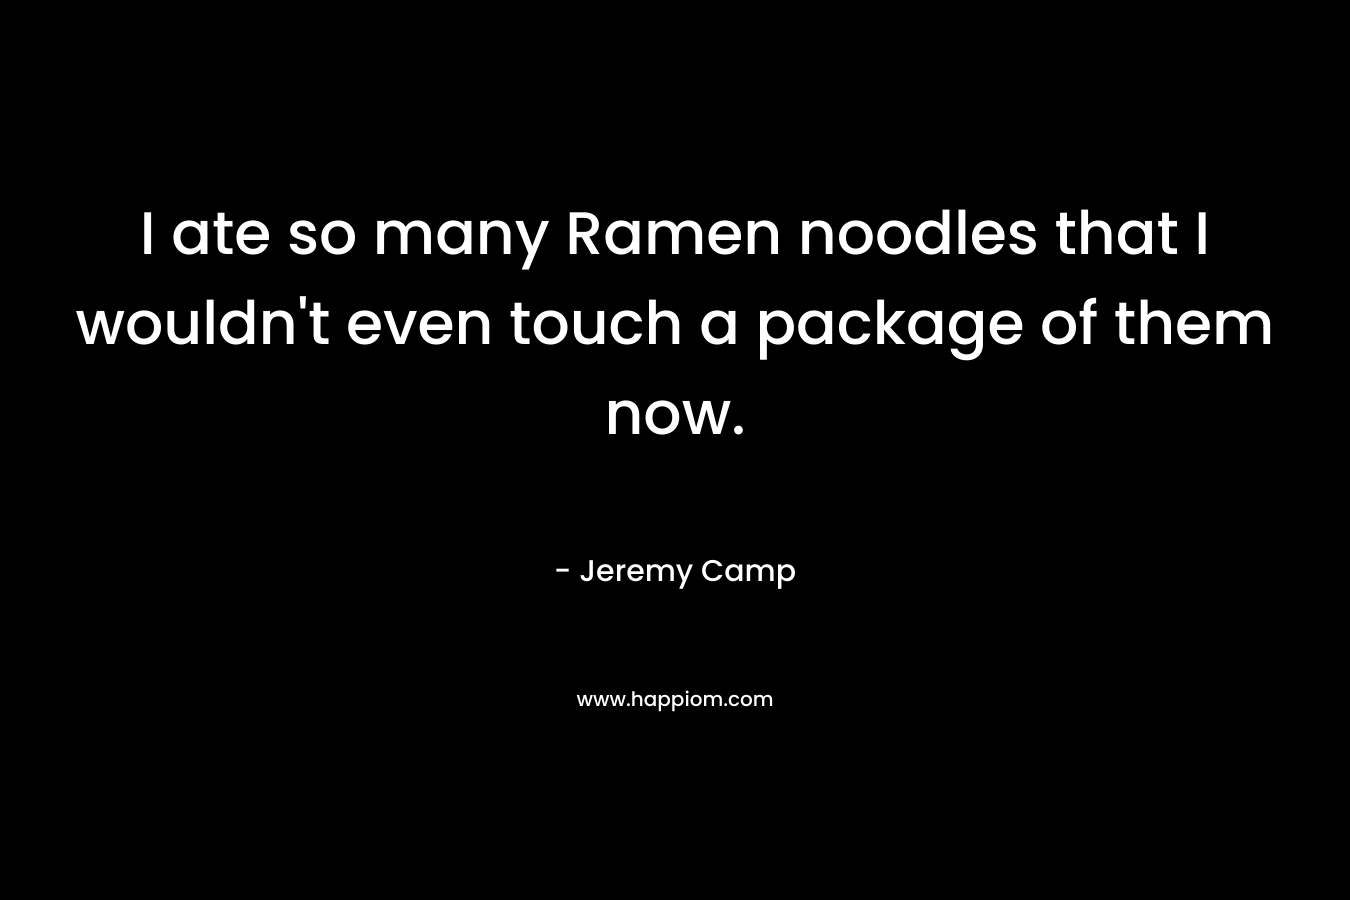 I ate so many Ramen noodles that I wouldn’t even touch a package of them now. – Jeremy Camp